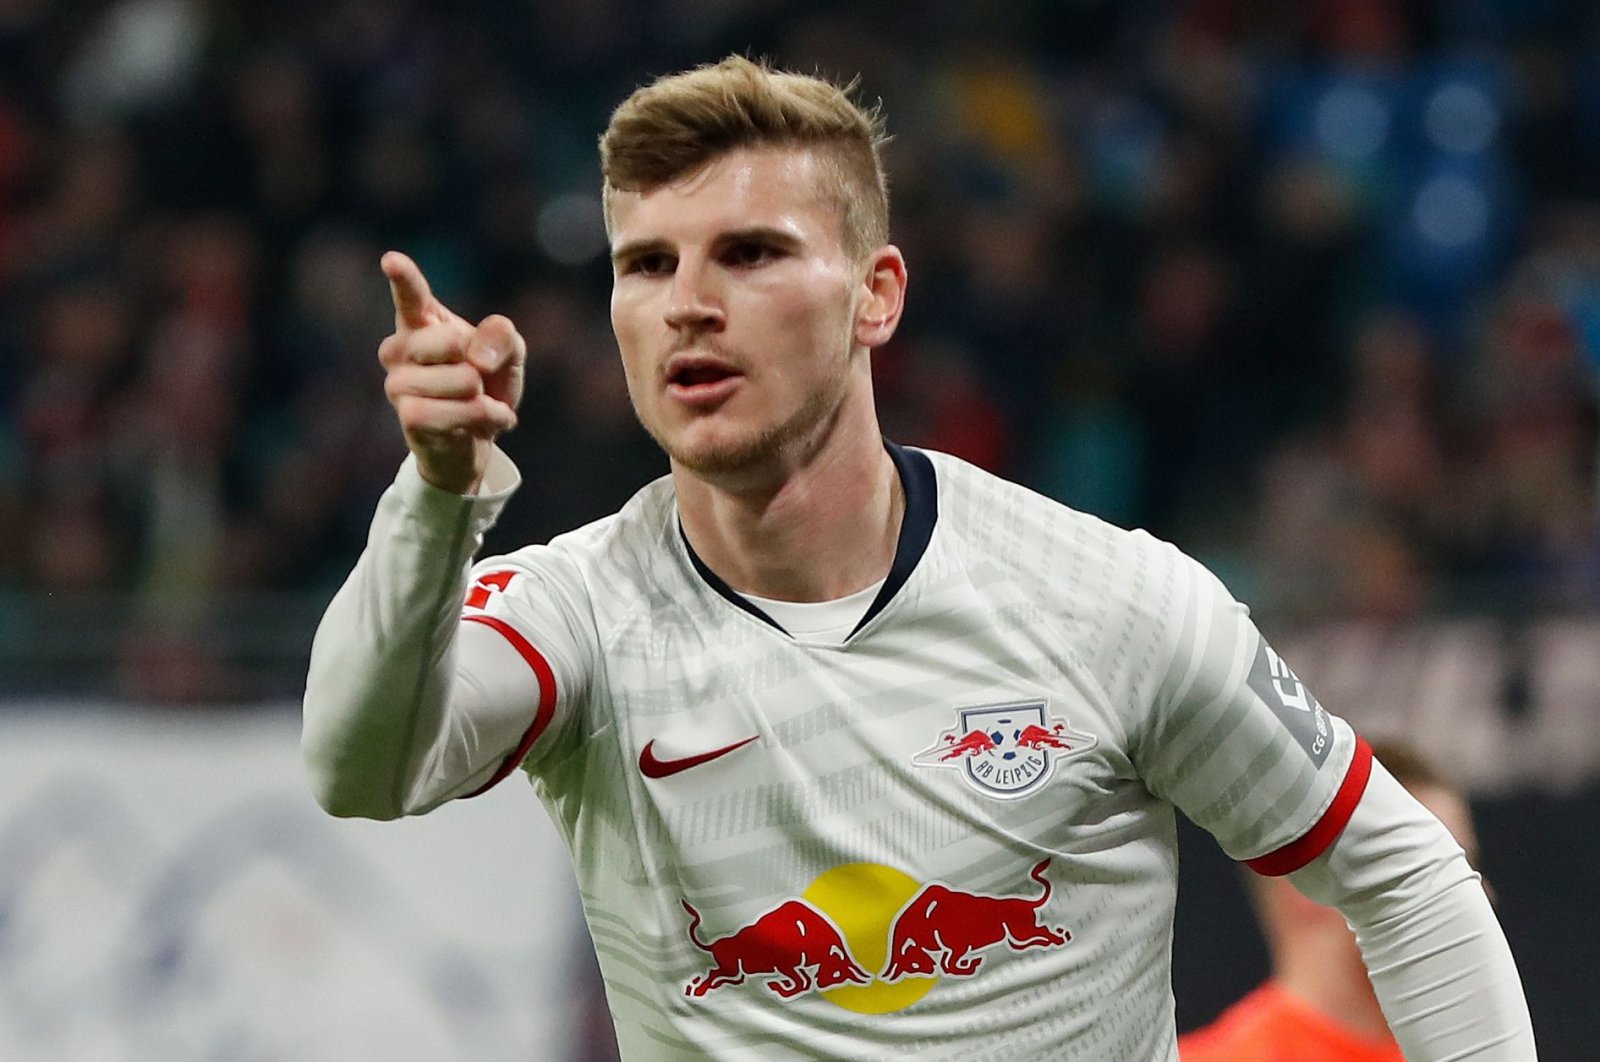 Timo Werner reacts during a Bundesliga match in Leipzig, Germany Nov. 23, 2019. (AFP Photo)